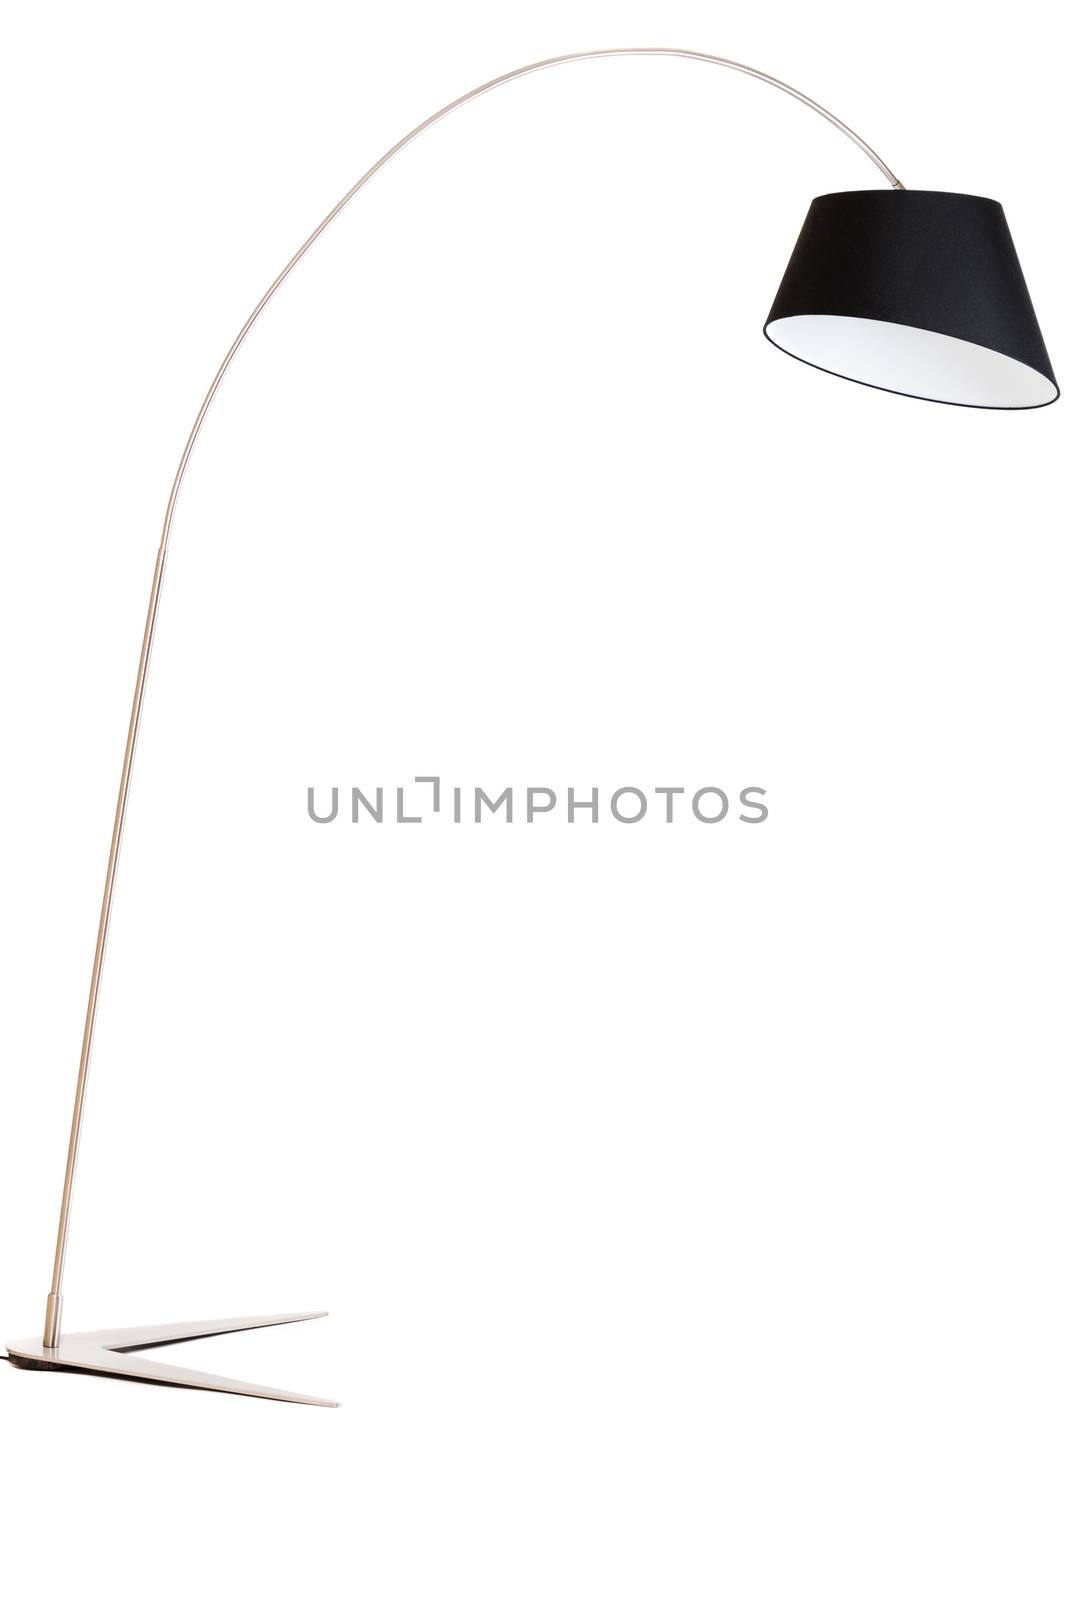 Contemporary metallic and black floor lamp isolated on white backgrounds